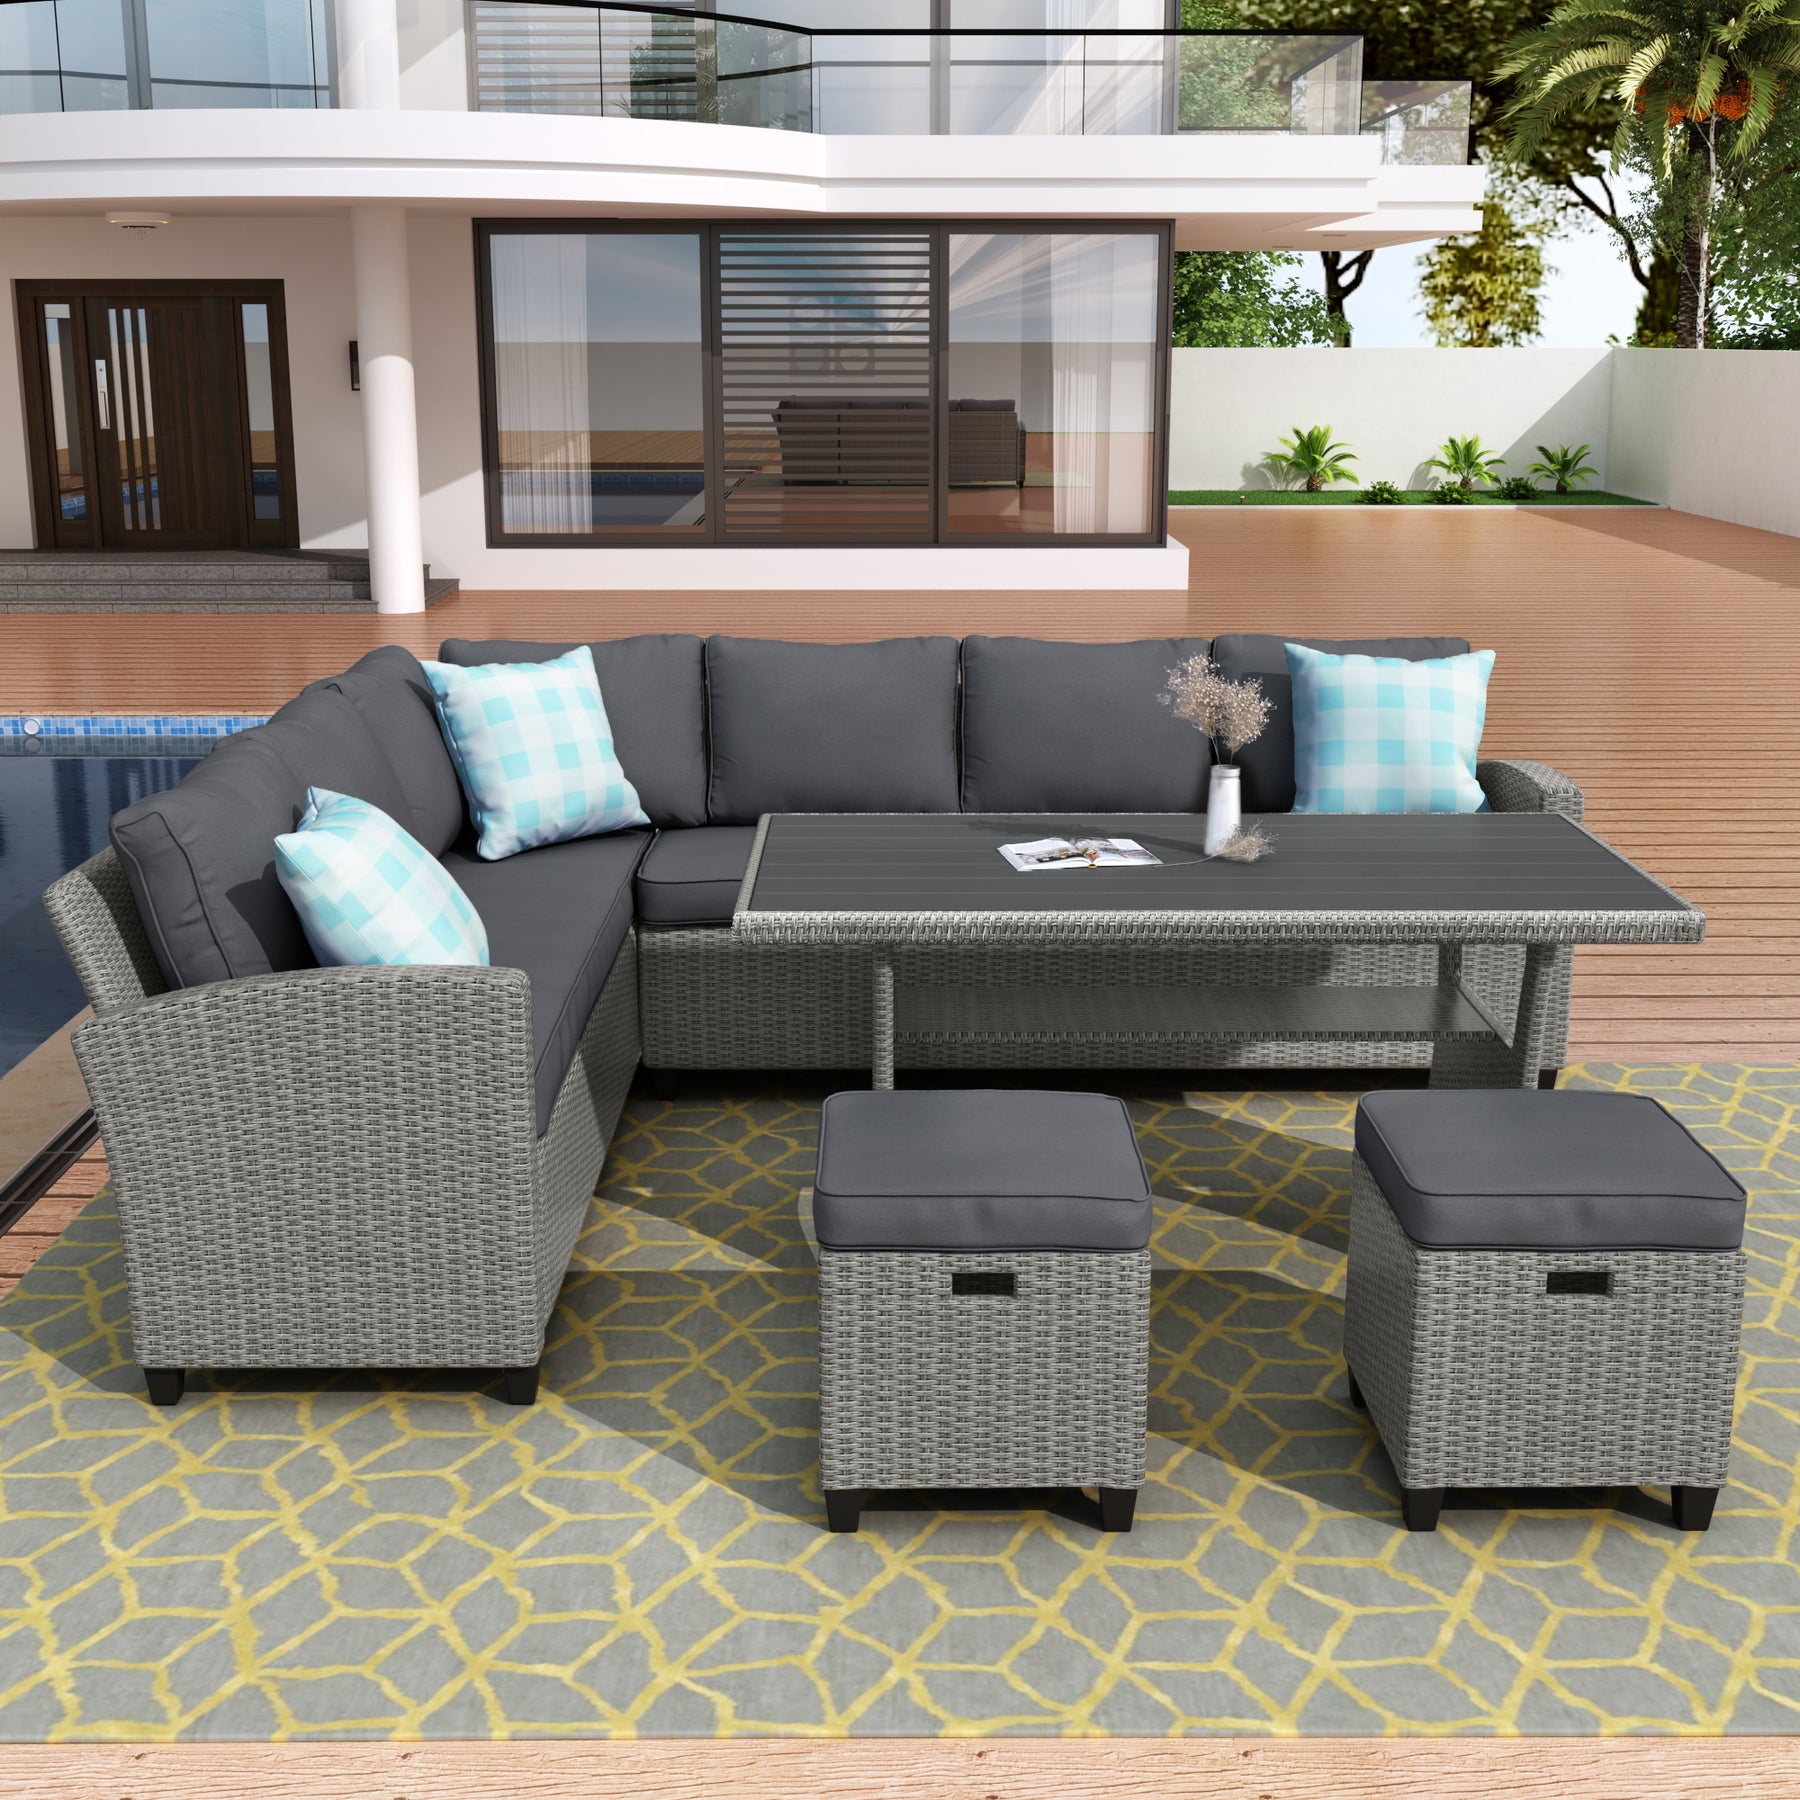 U_STYLE Patio Furniture Set, 5 Piece Outdoor Conversation Set,  Dining Table Chair with Ottoman and Throw Pillows - Tonkn